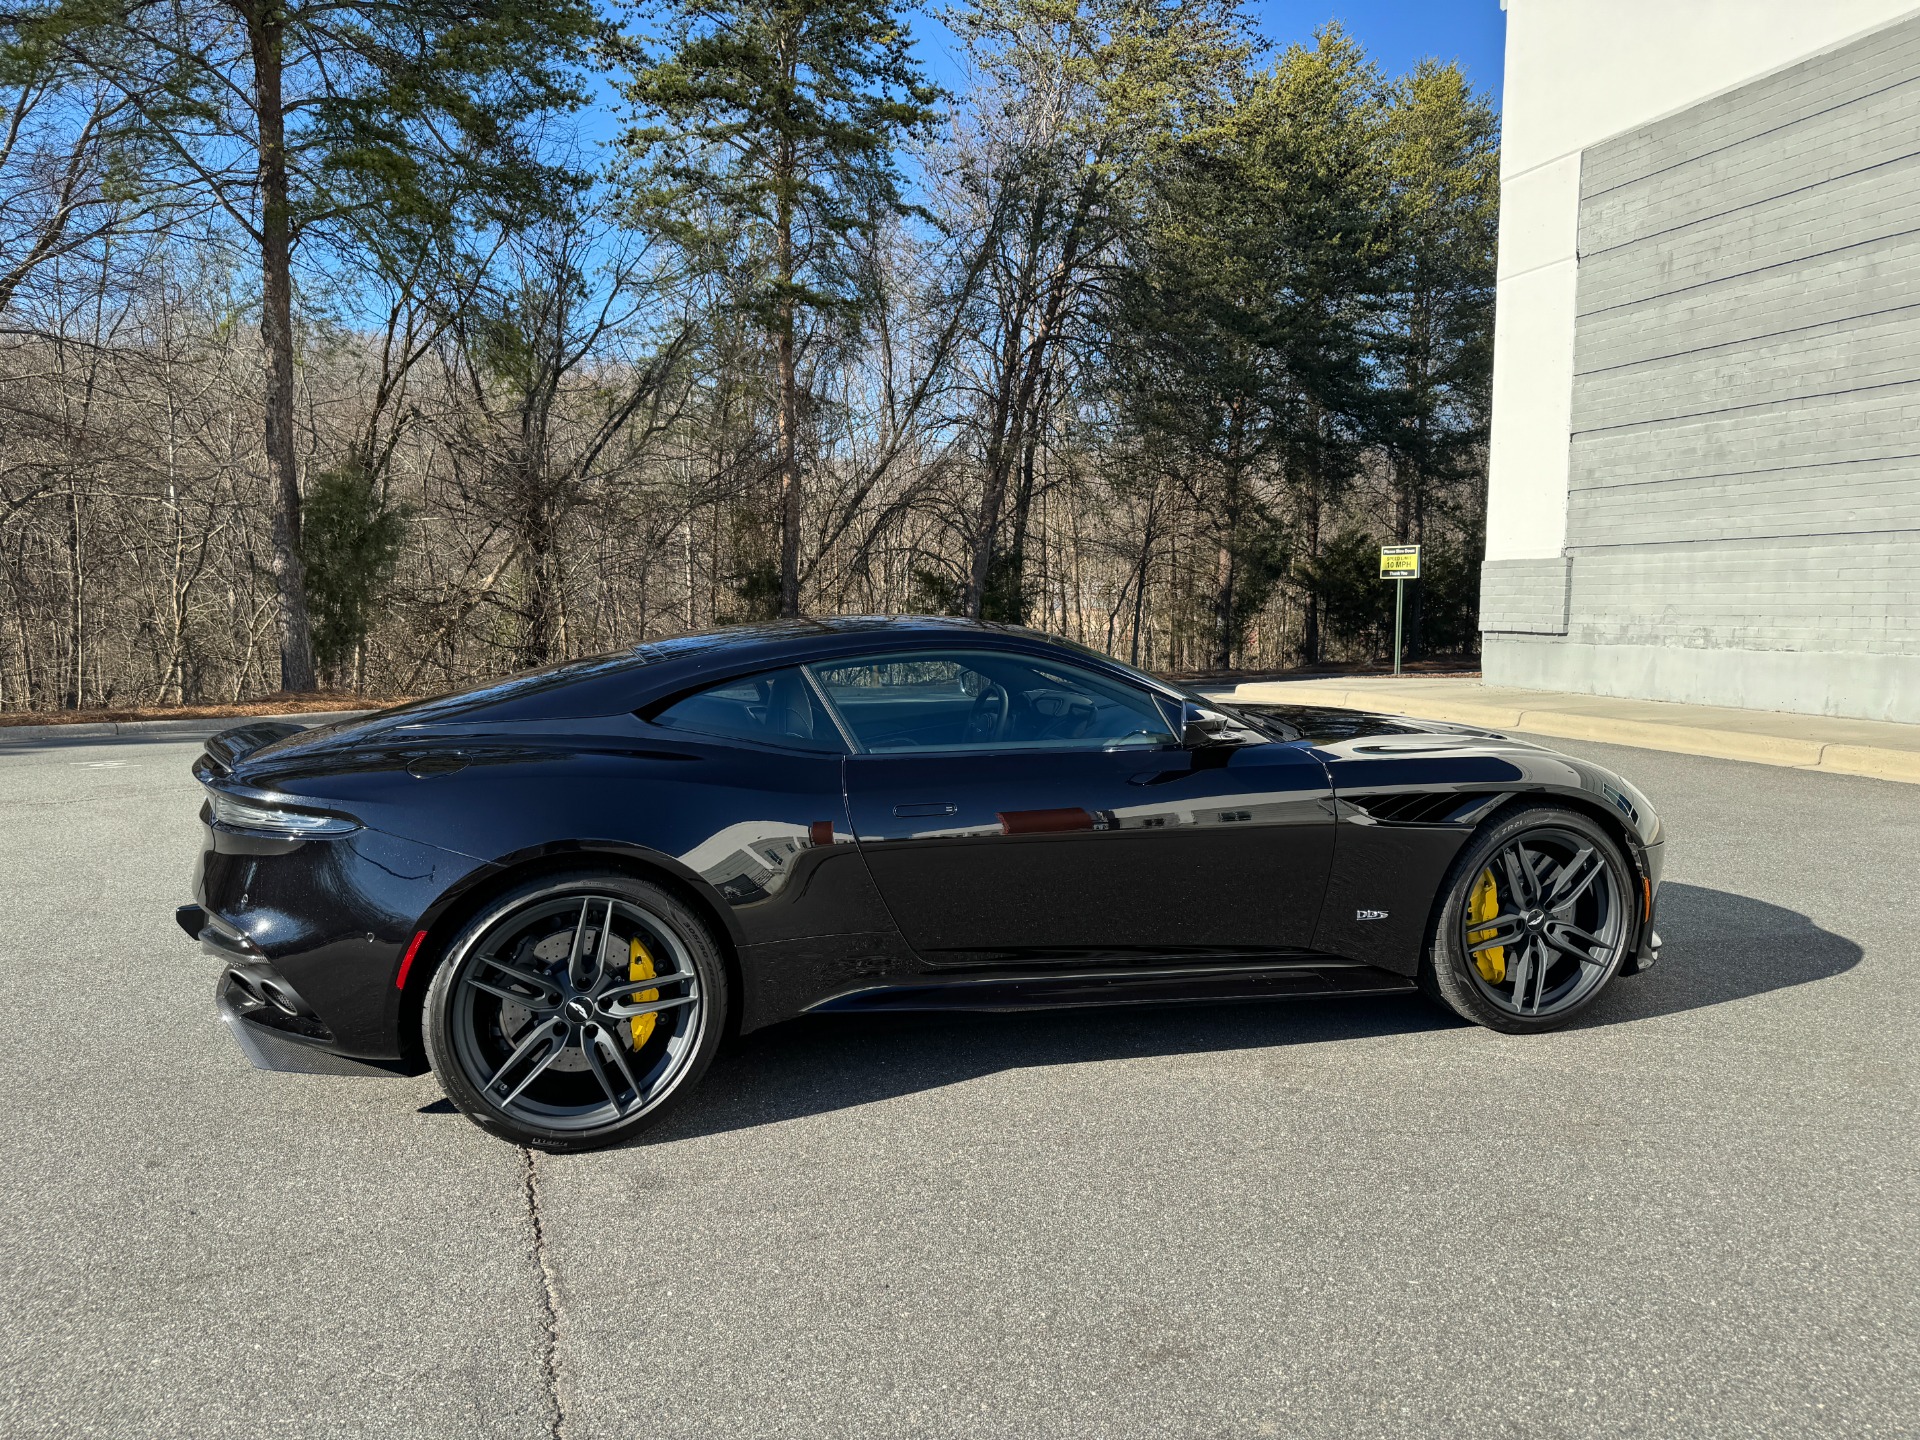 Used 2020 Aston Martin DBS SUPERLEGGERA / CARBON FIBER / V12 750HP / ACCENT STITCHING for sale $240,000 at Formula Imports in Charlotte NC 28227 15